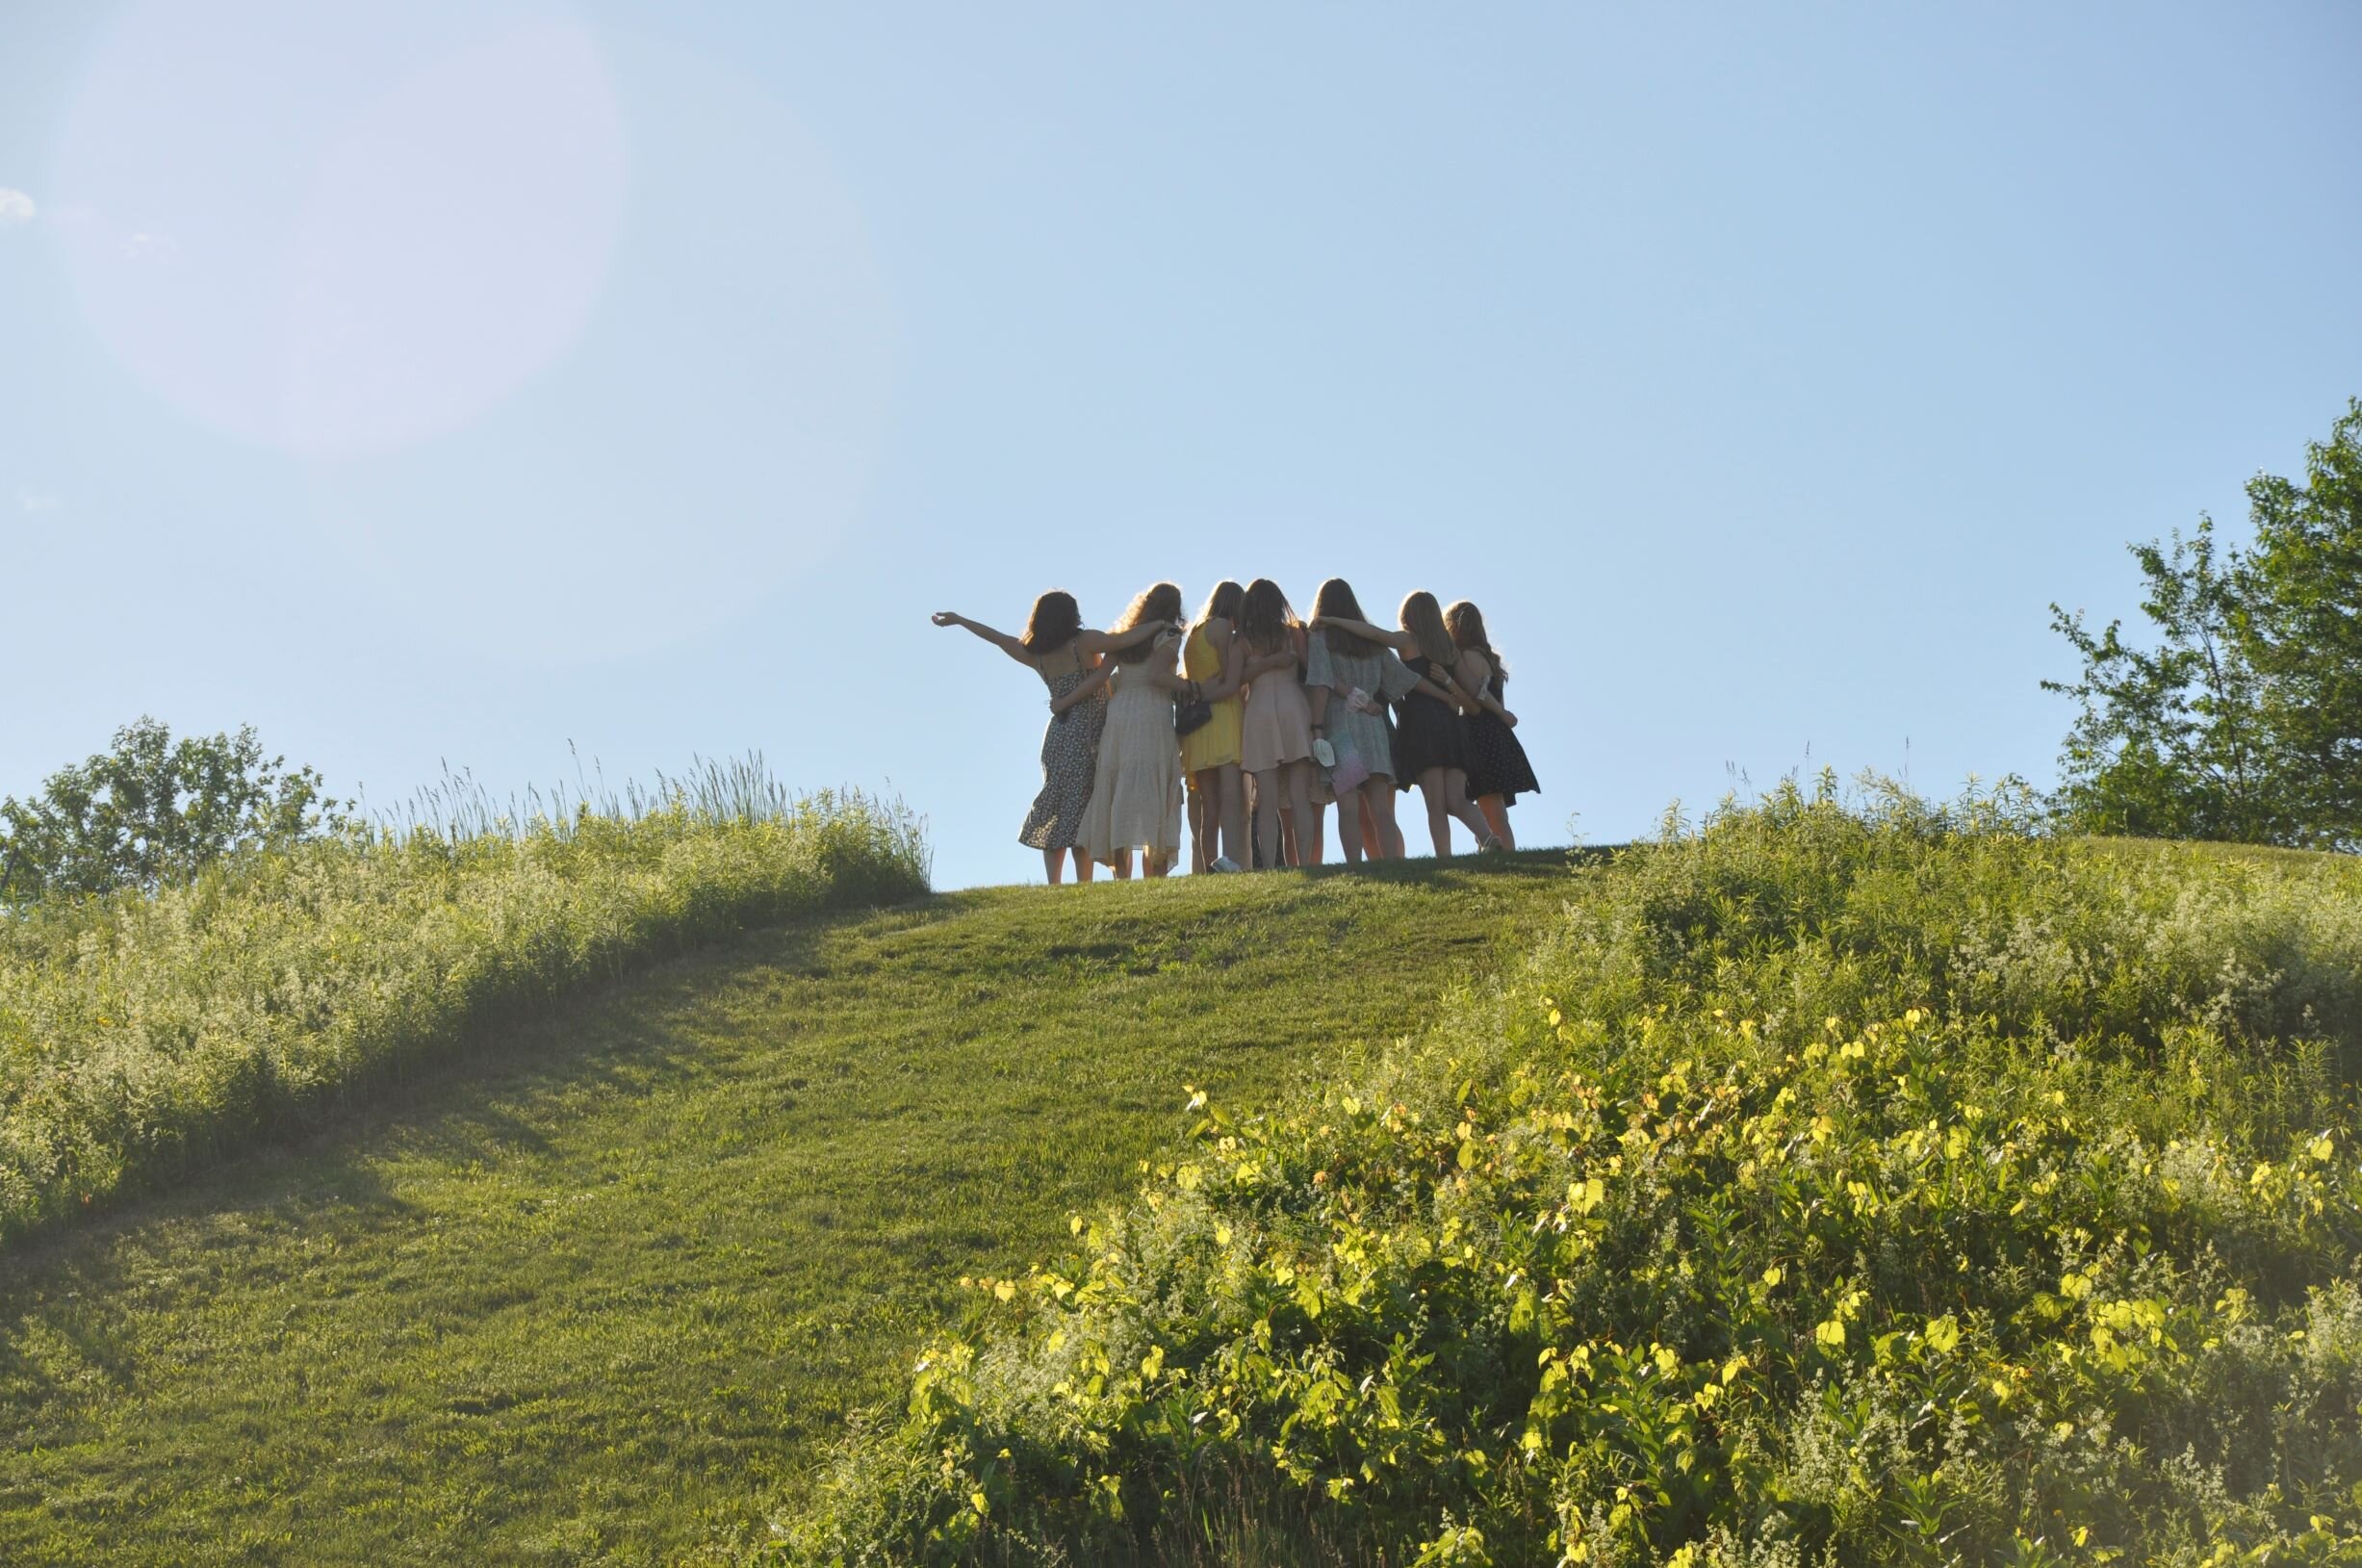   The sledding hill as graduation photo op. Photo by Lisa Scagliotti.  